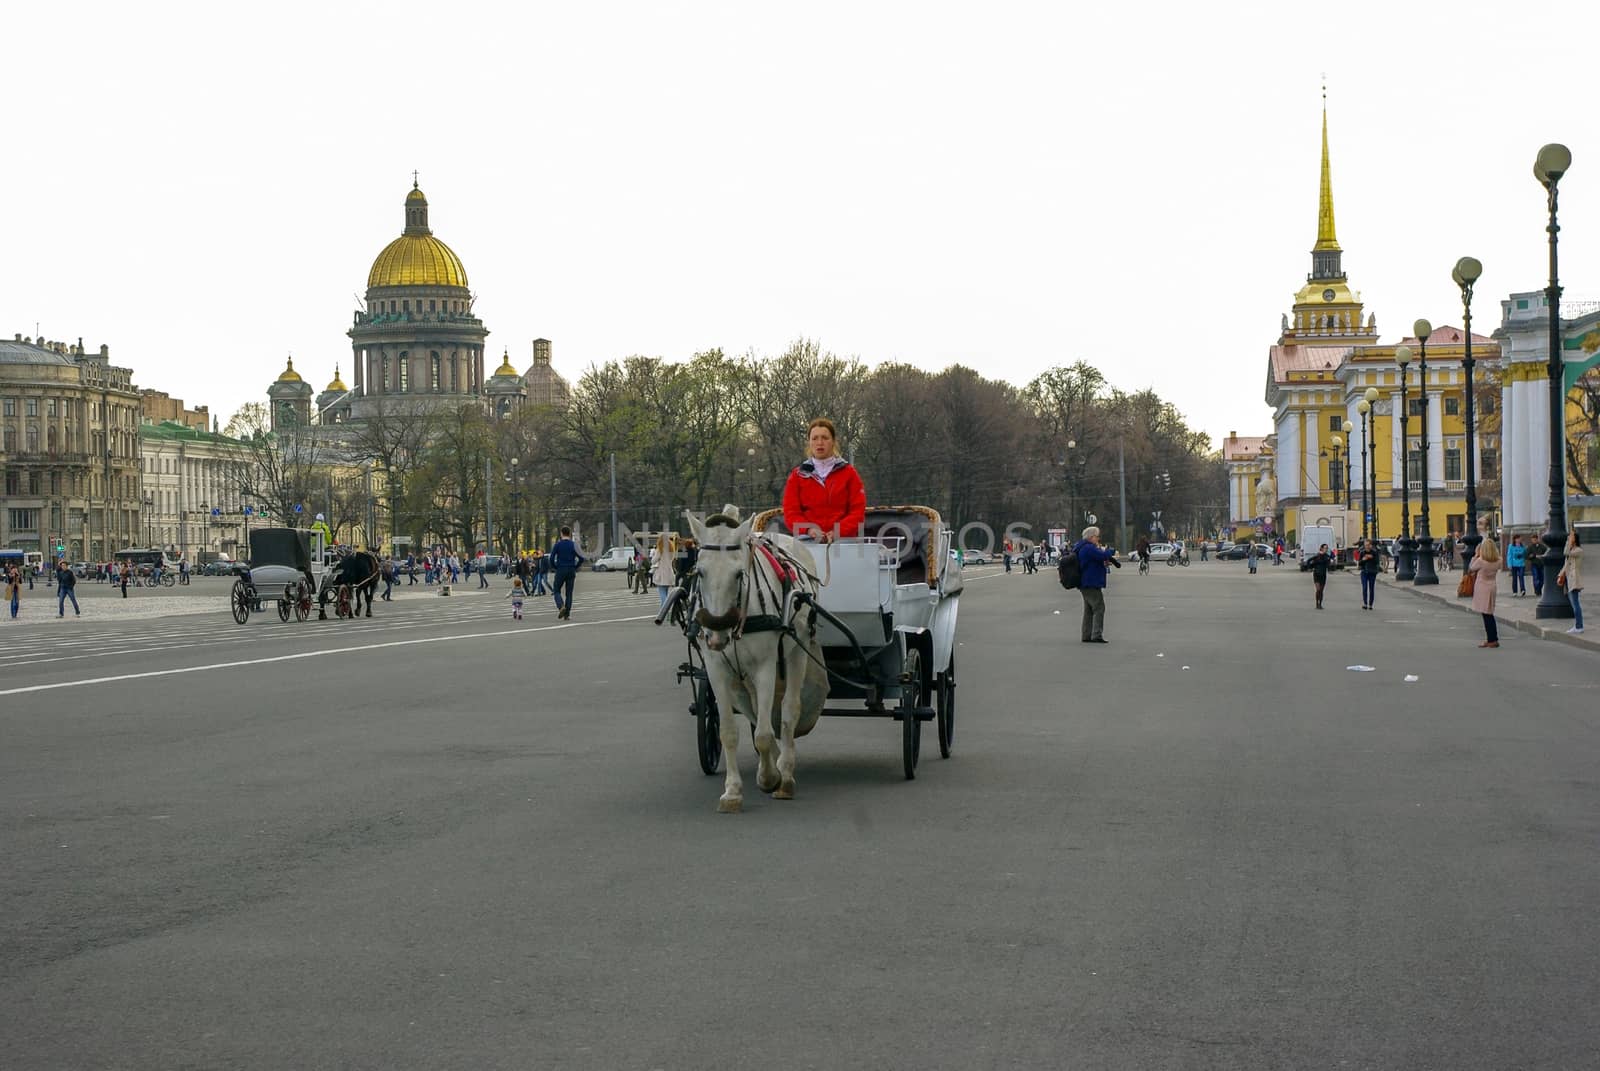 ST. PETERSBURG, RUSSIA - JANUARY 01, 2008:Carriage with horses on the Palace Square with view to the Kazan Cathedral Cathedral of Our Lady of Kazan , in Saint Petersburg, Russia by evolutionnow